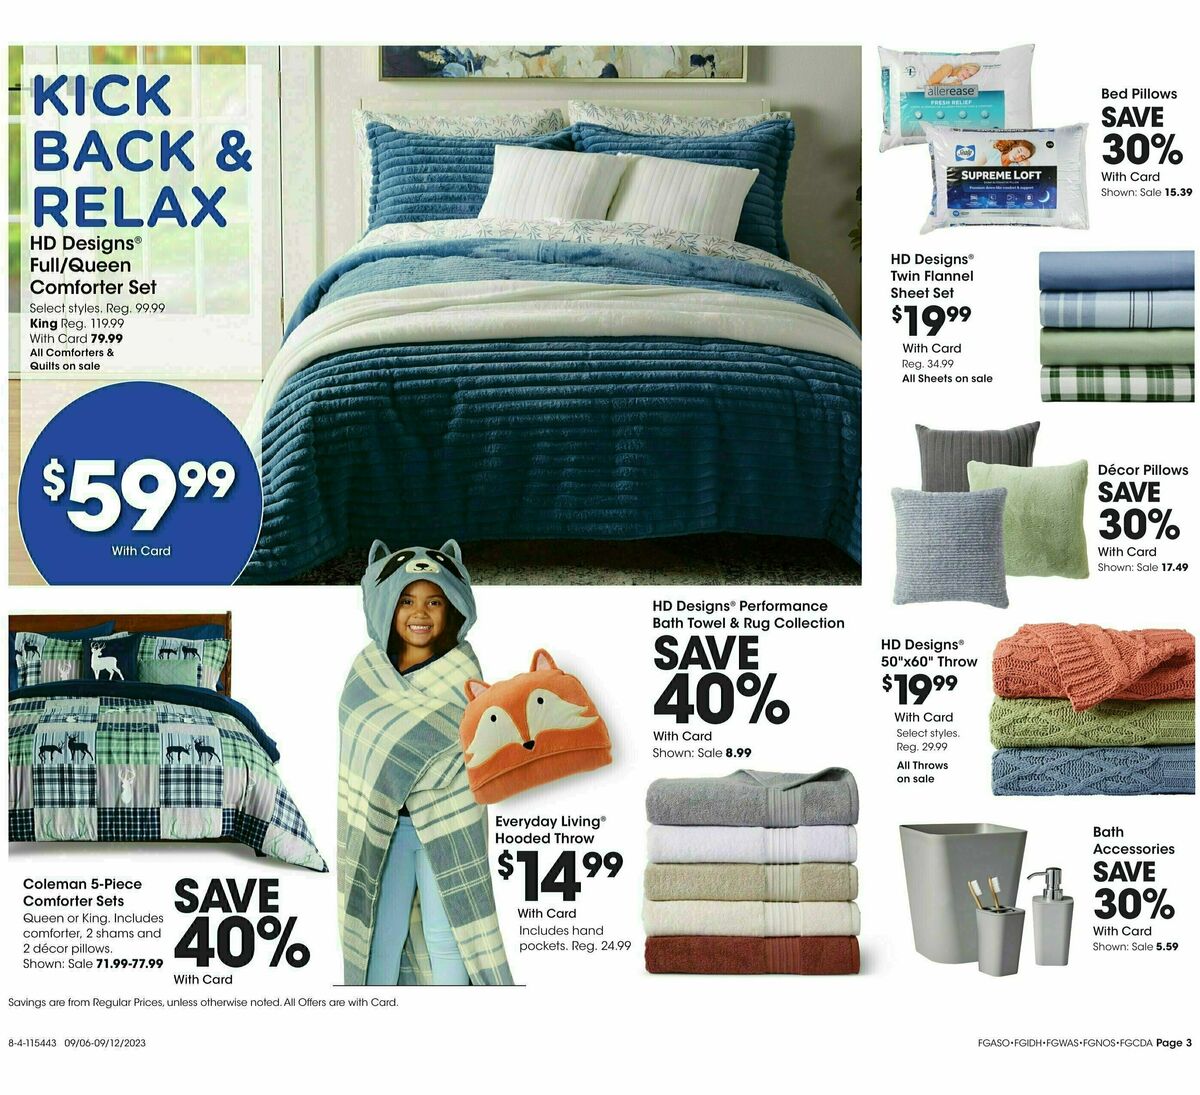 Fred Meyer General Merchandise Weekly Ad from September 6